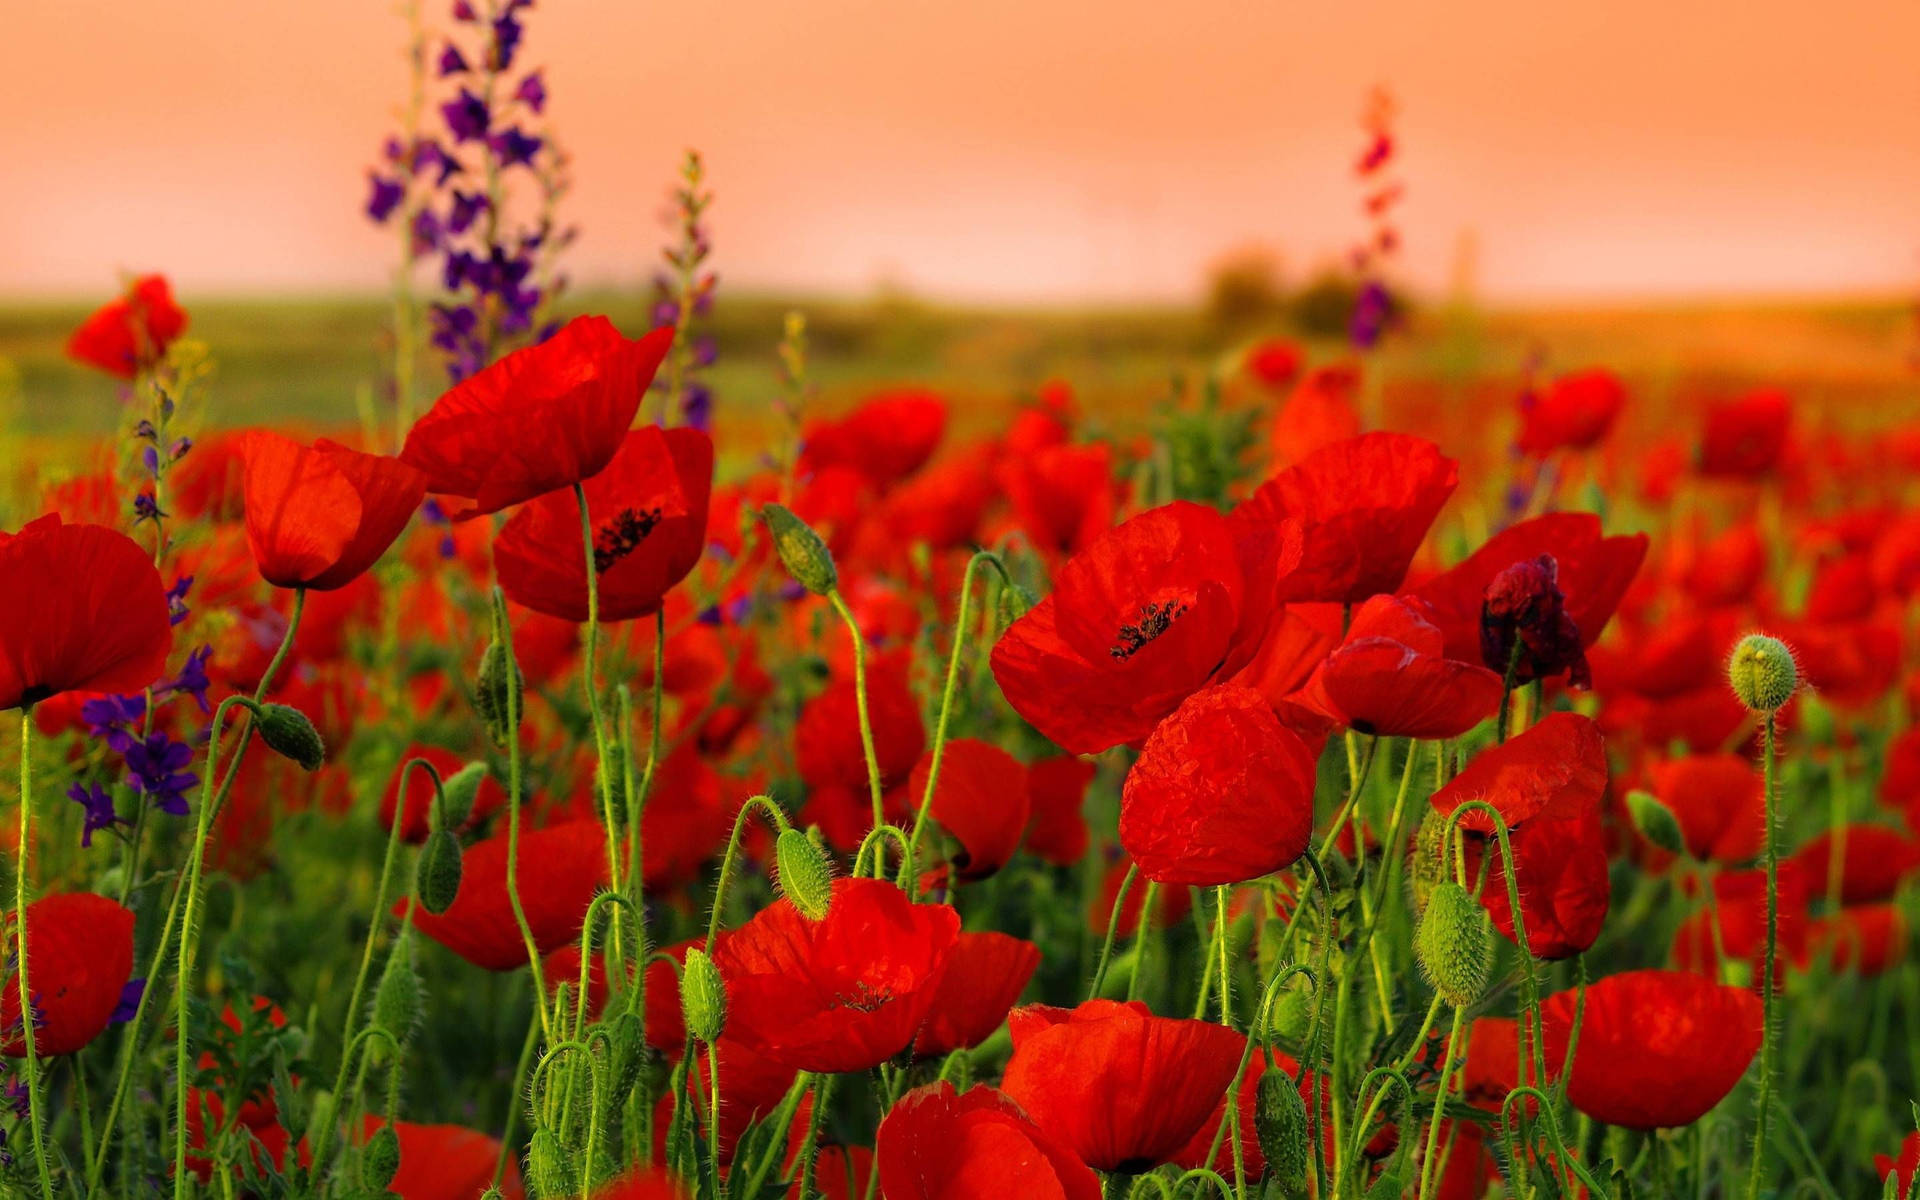 Download Poppies wallpapers for mobile phone free Poppies HD pictures